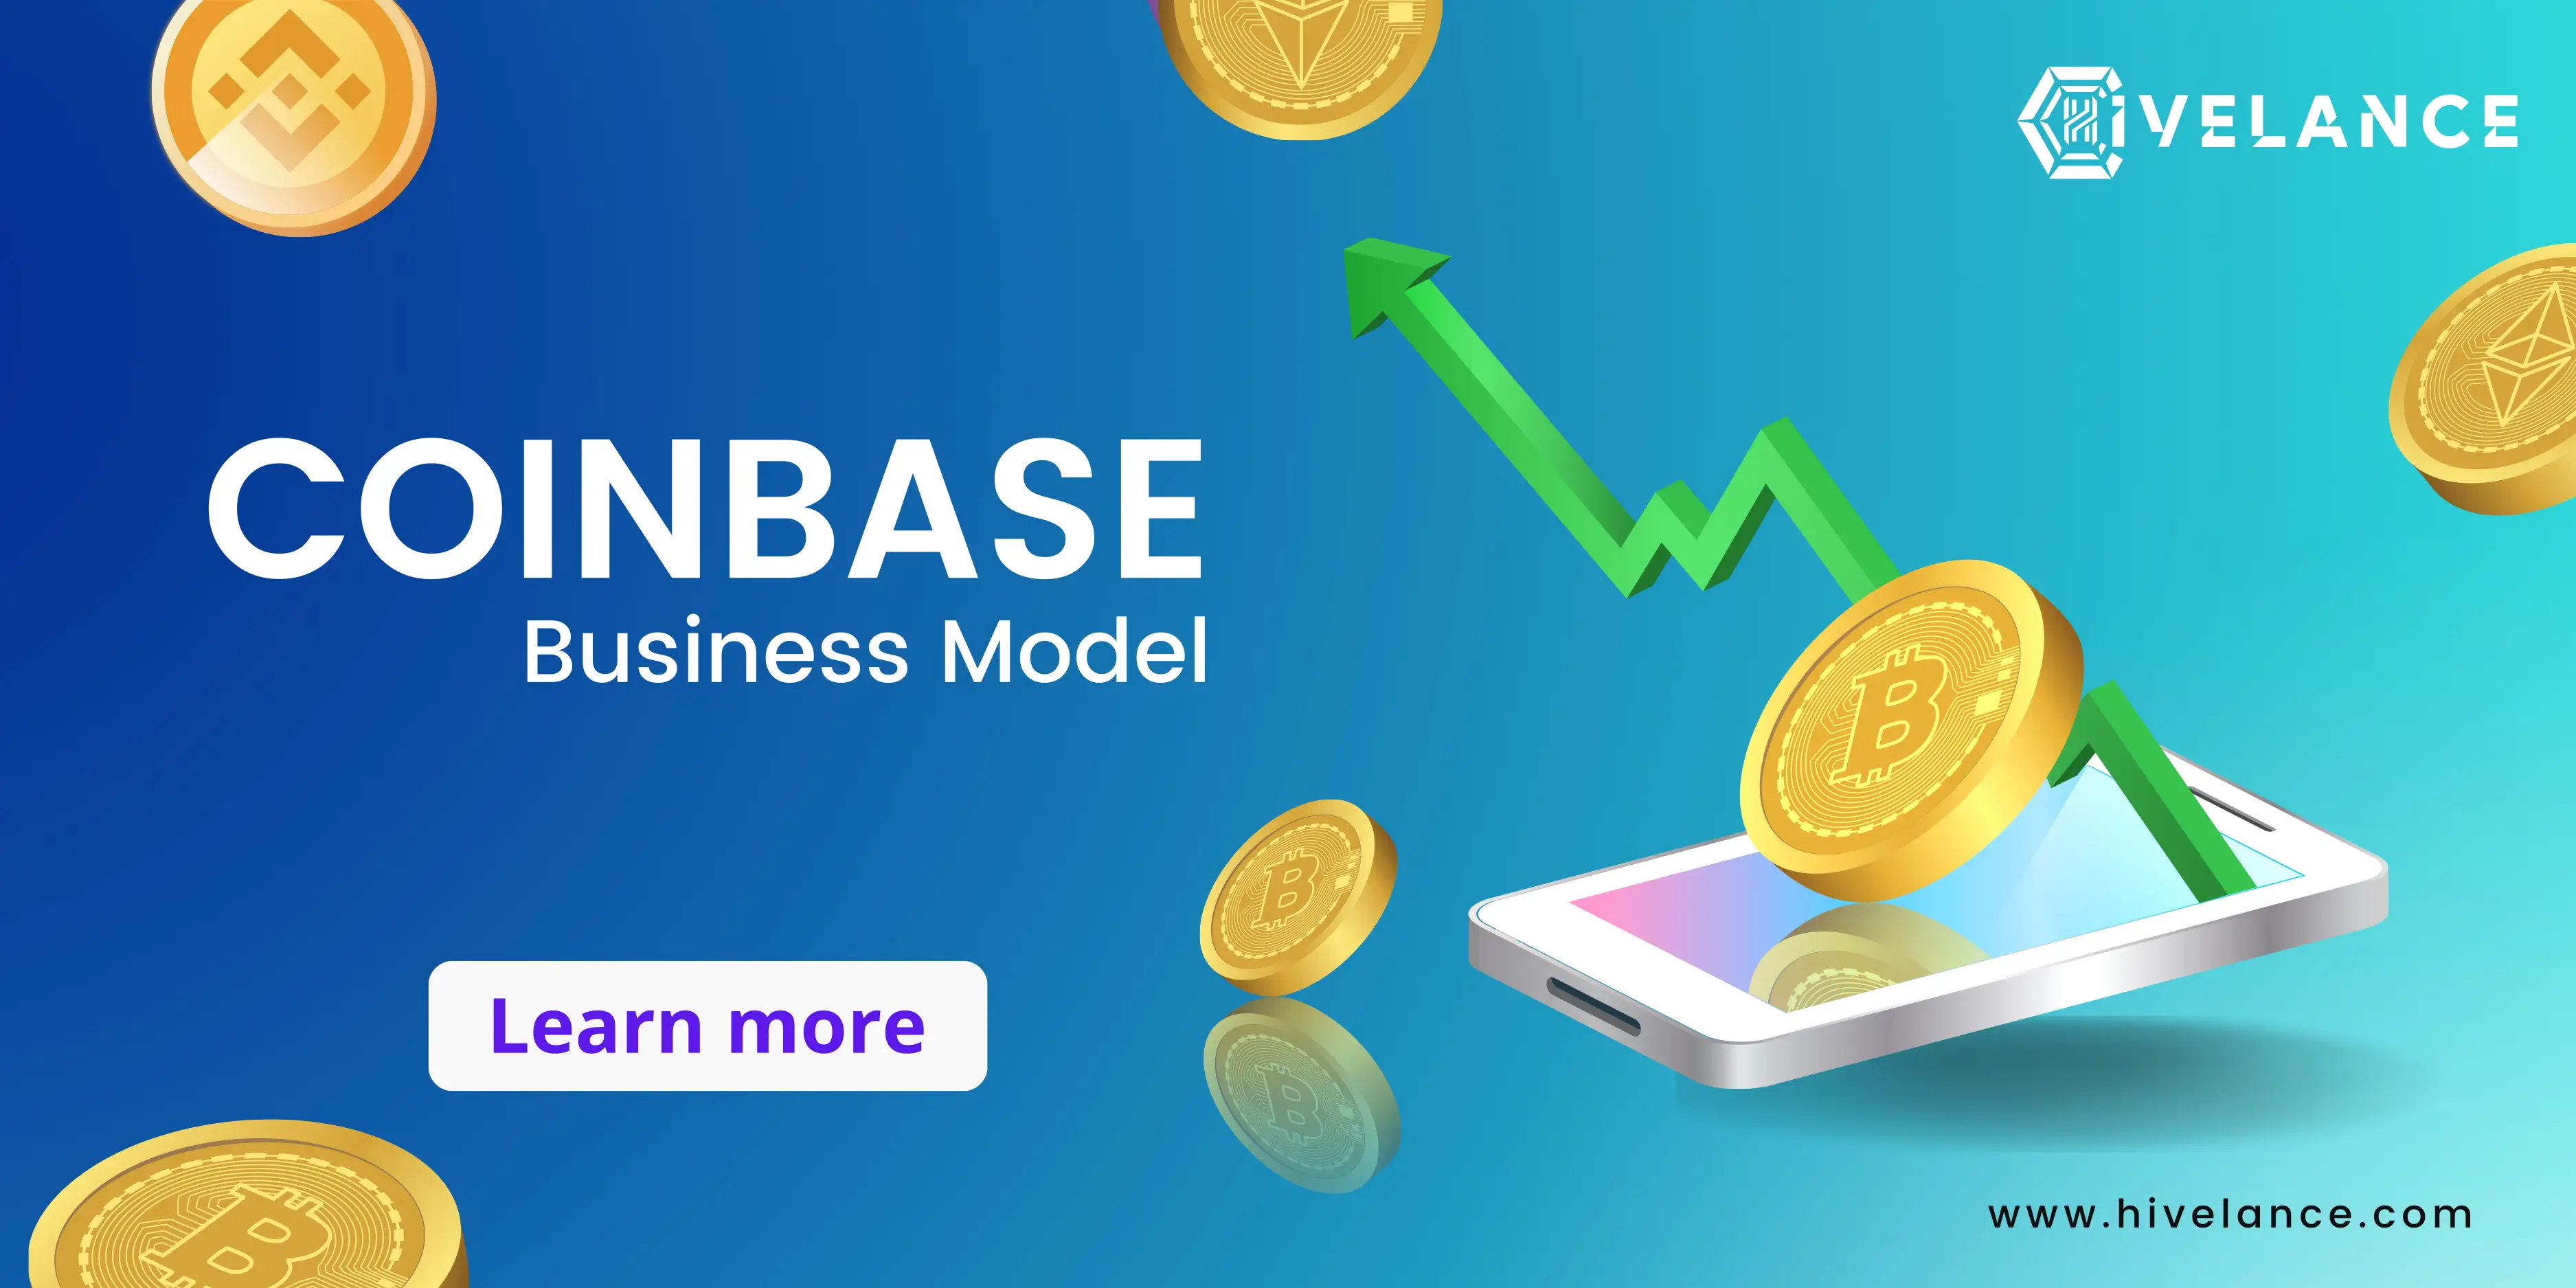 Coinbase Business Model Explained - How Coinbase earns revenue from mutiple streams?